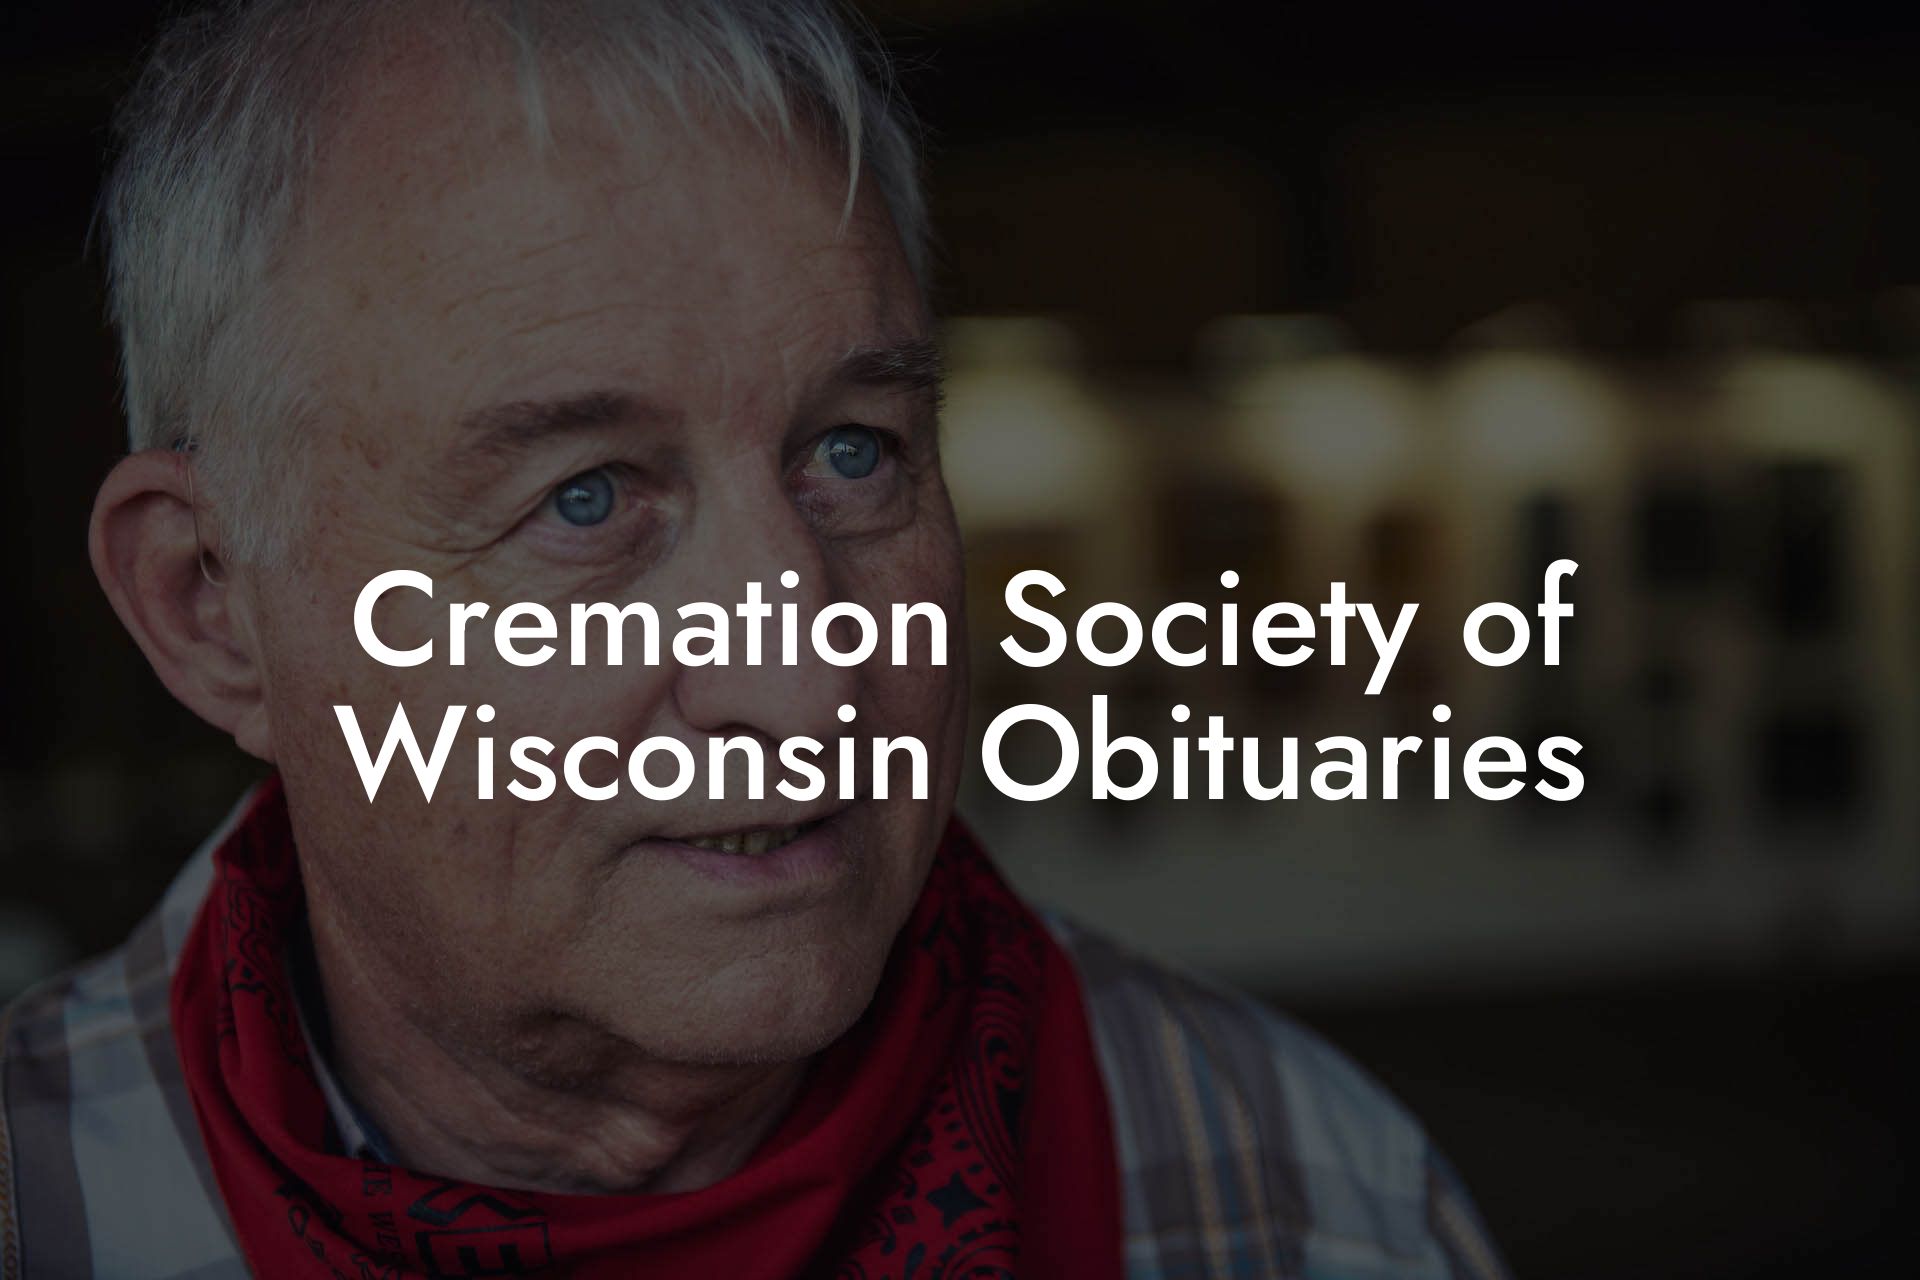 Cremation Society of Wisconsin Obituaries